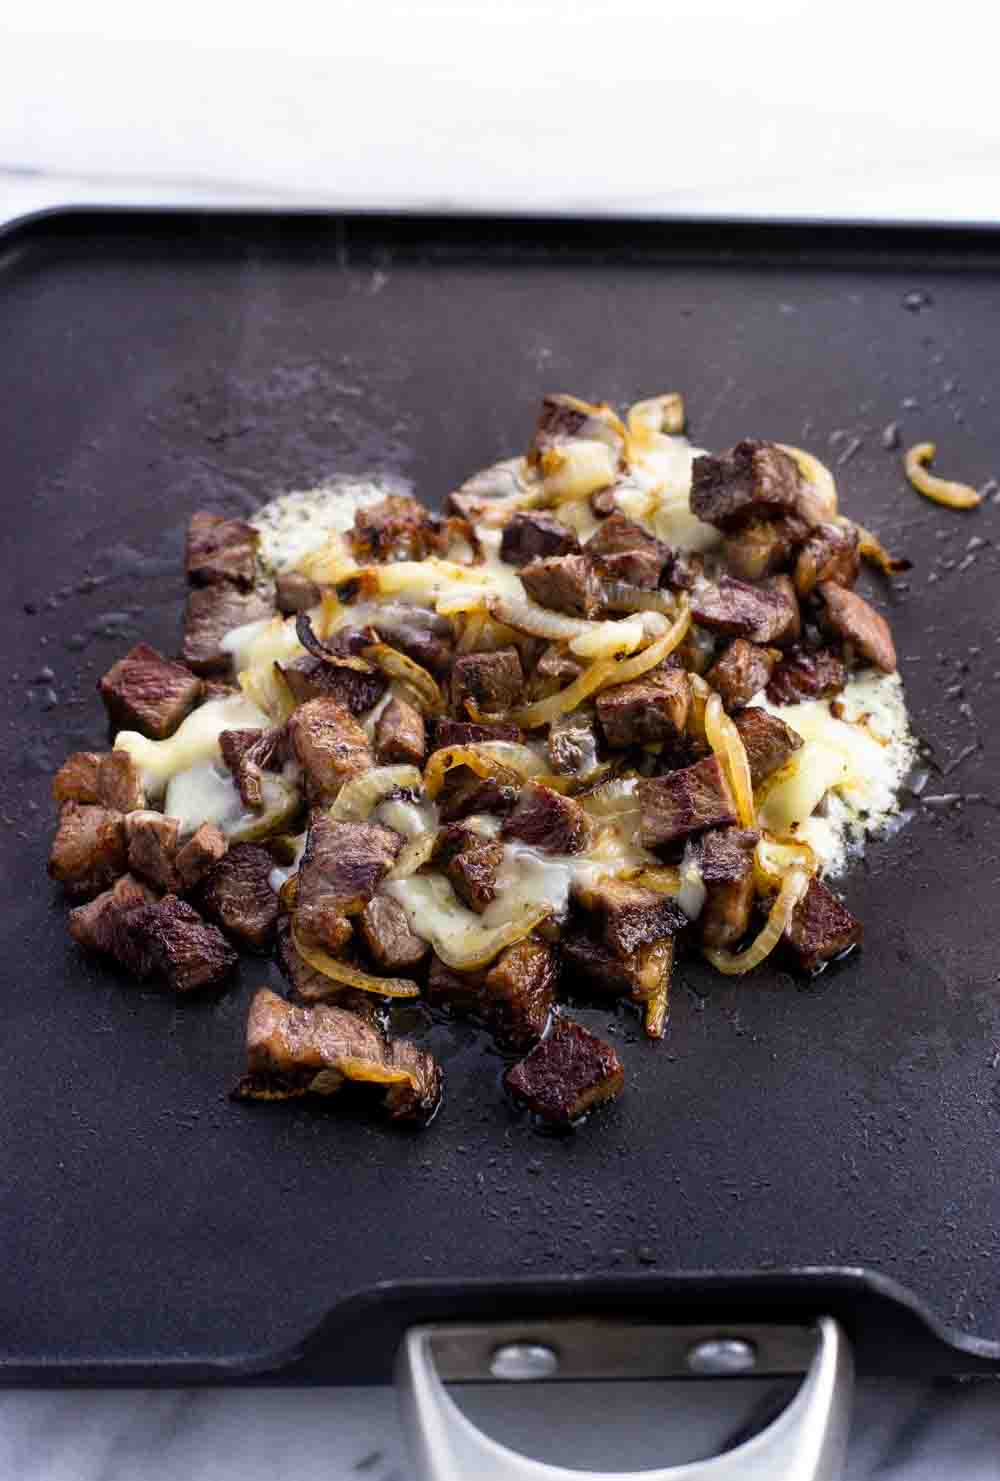 Melted cheese mixed into the steak and onion on a pan.